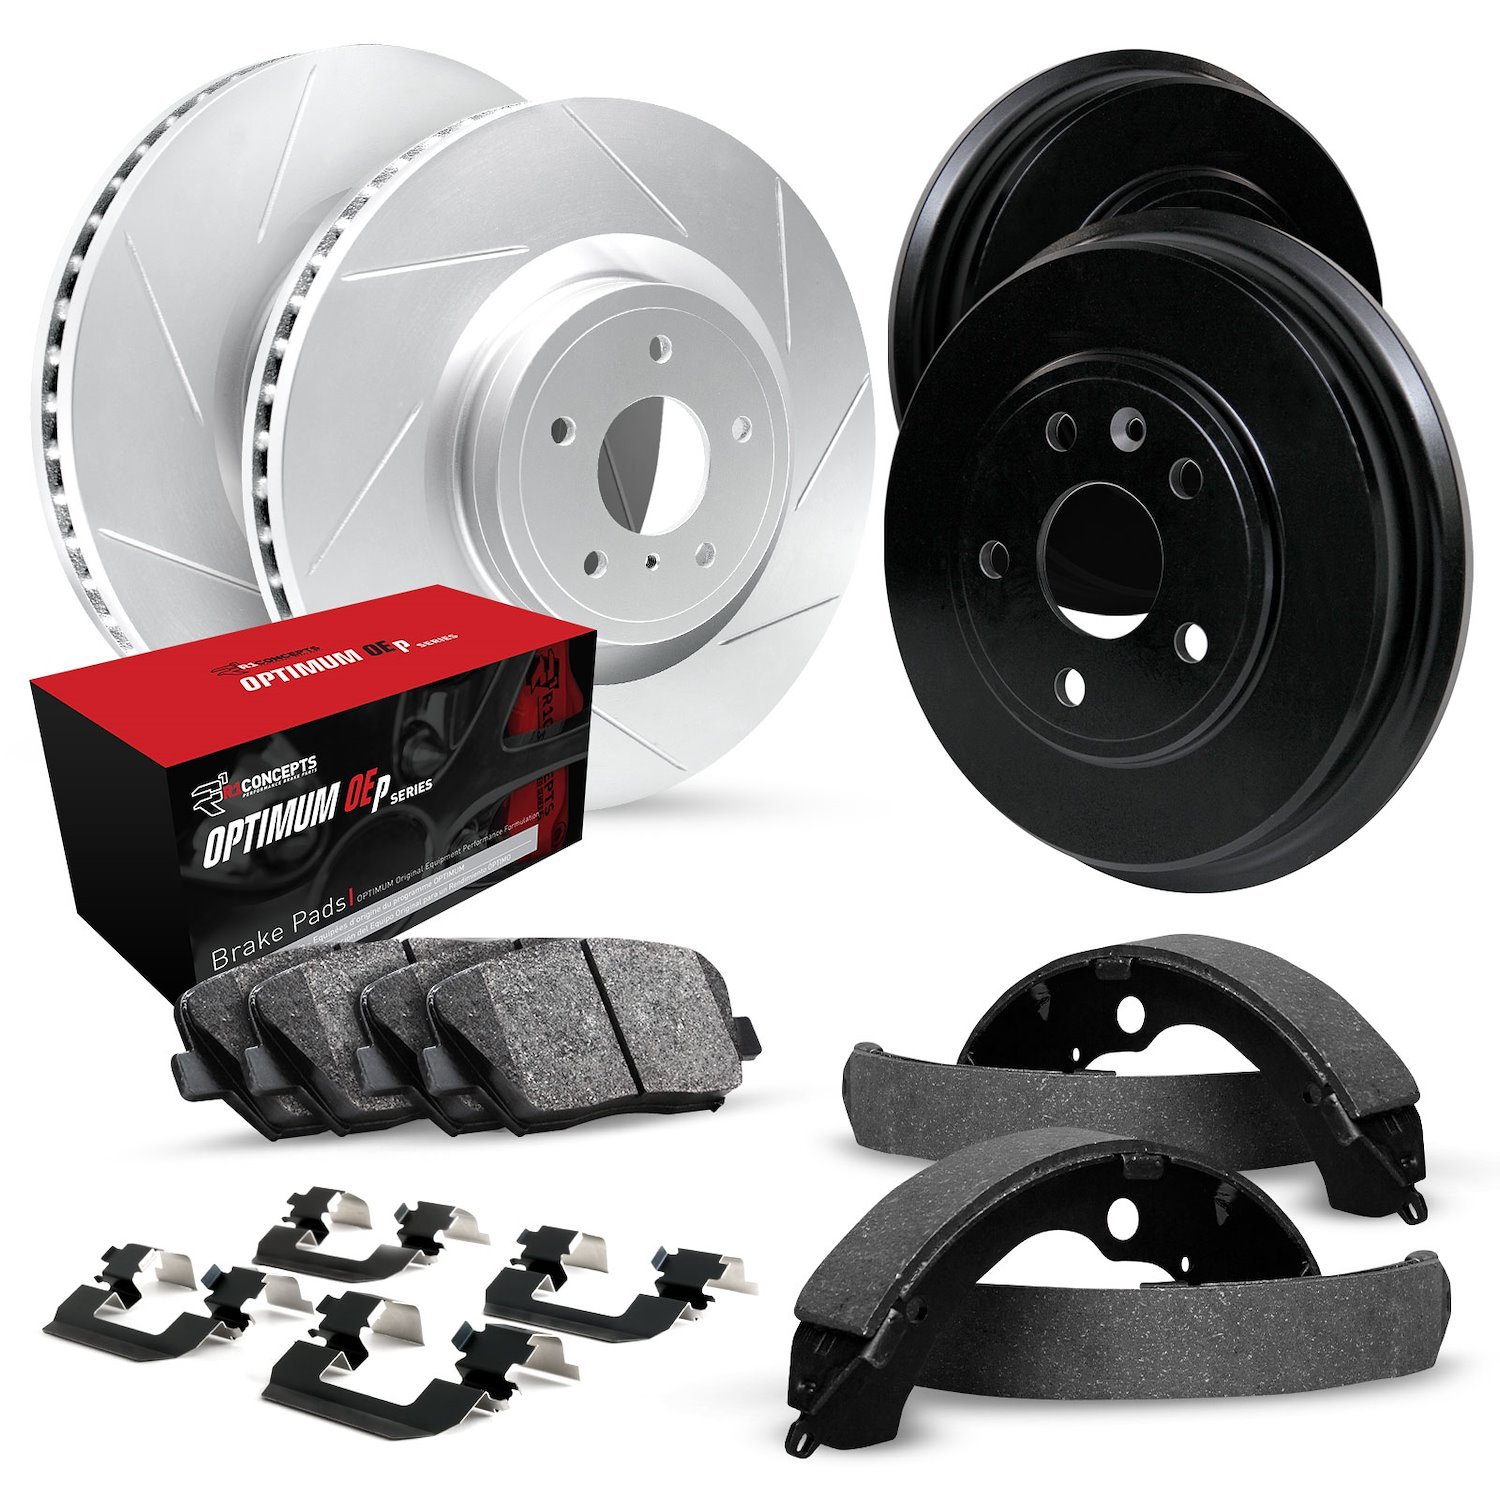 GEO-Carbon Slotted Brake Rotor & Drum Set w/Optimum OE Pads, Shoes, & Hardware, 1973-1975 GM, Position: Front & Rear